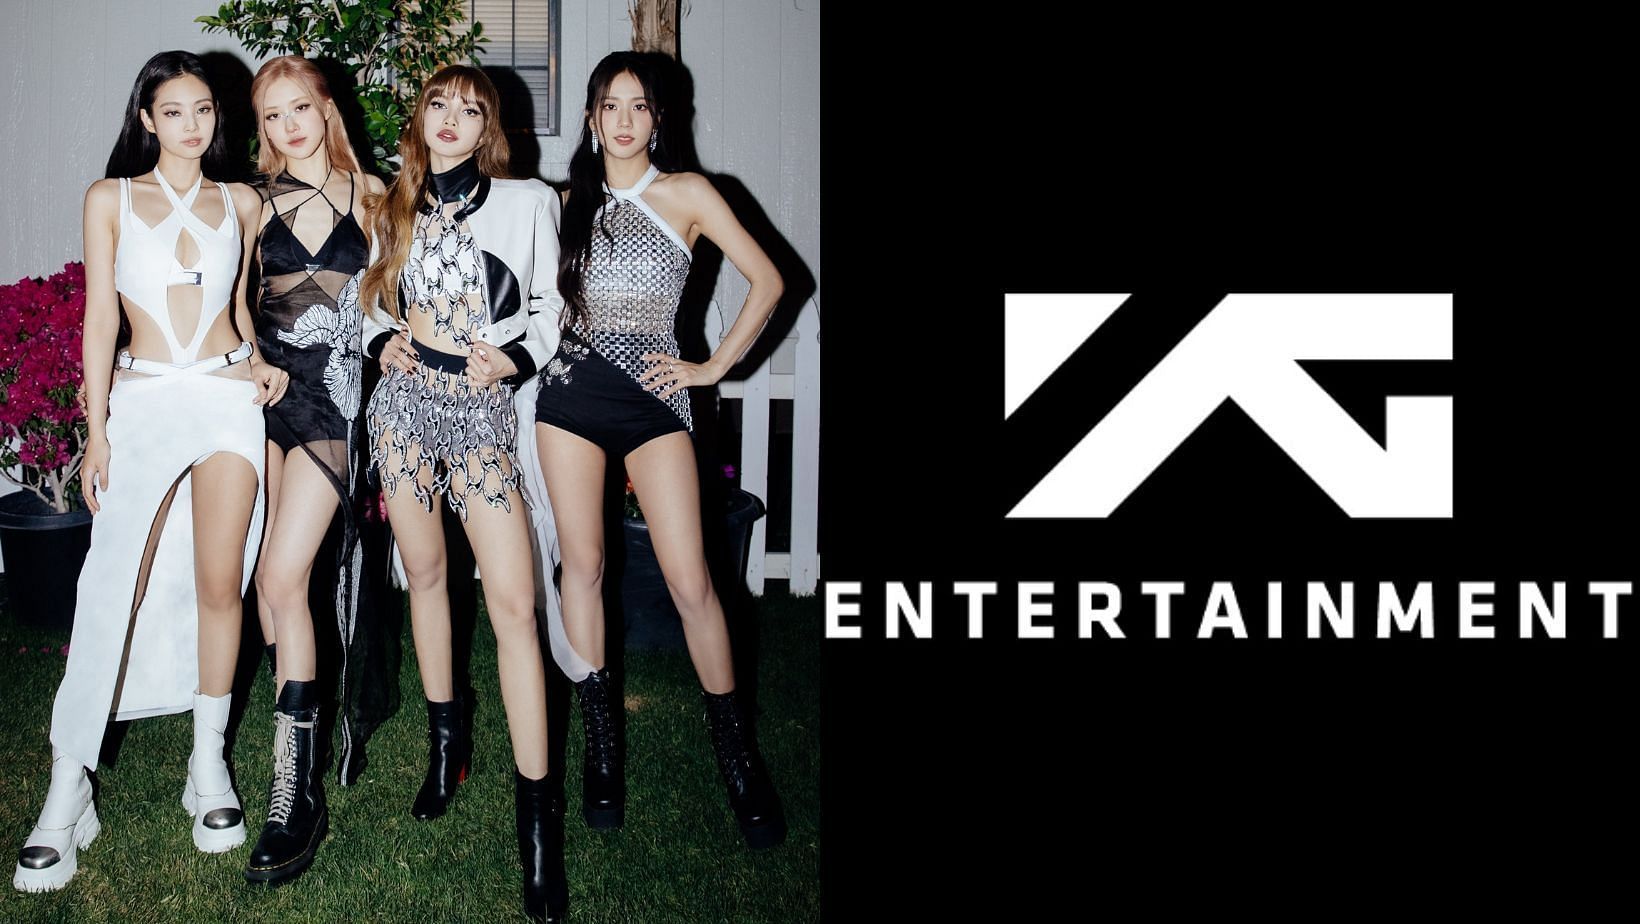 Blackpink Members Decline Signing Solo Contracts With YG Entertainment